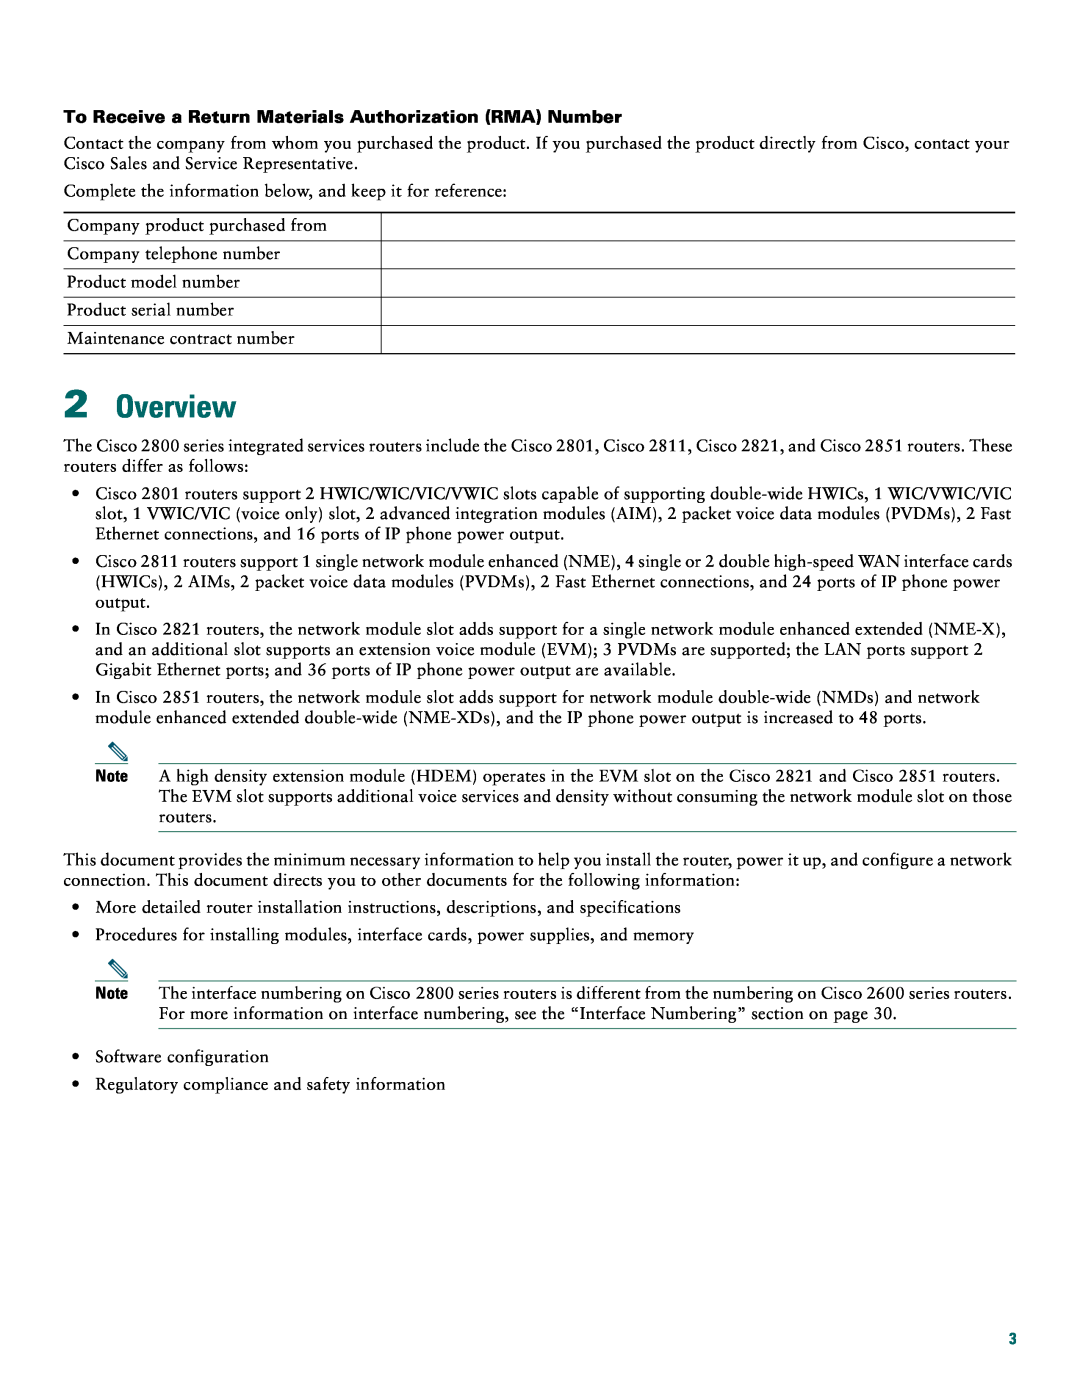 Cisco Systems 2800 manual Overview, To Receive a Return Materials Authorization RMA Number 